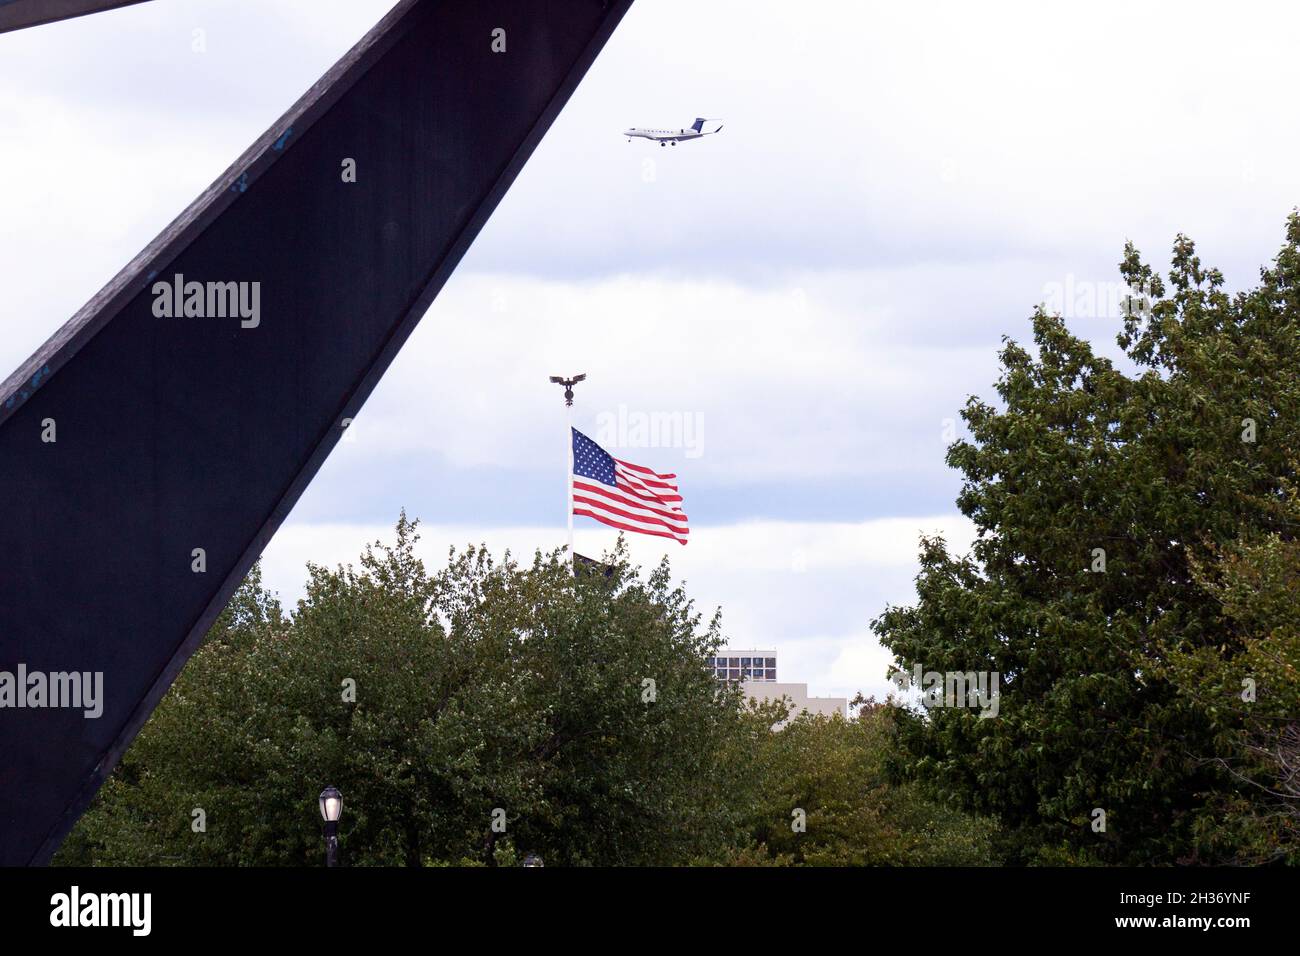 An American flag & airplane as seen through the Unisphere in Flushing Meadows Corona Park in Queens, New York City. Stock Photo